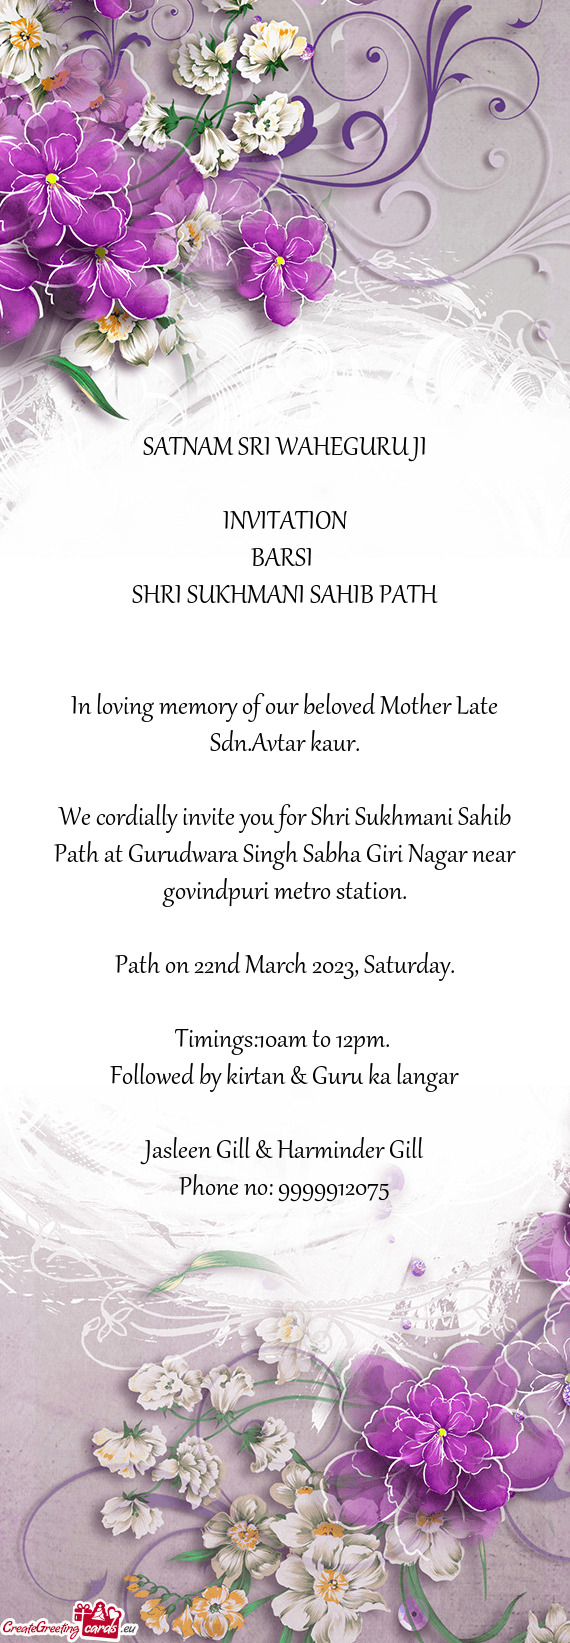 Path on 22nd March 2023, Saturday